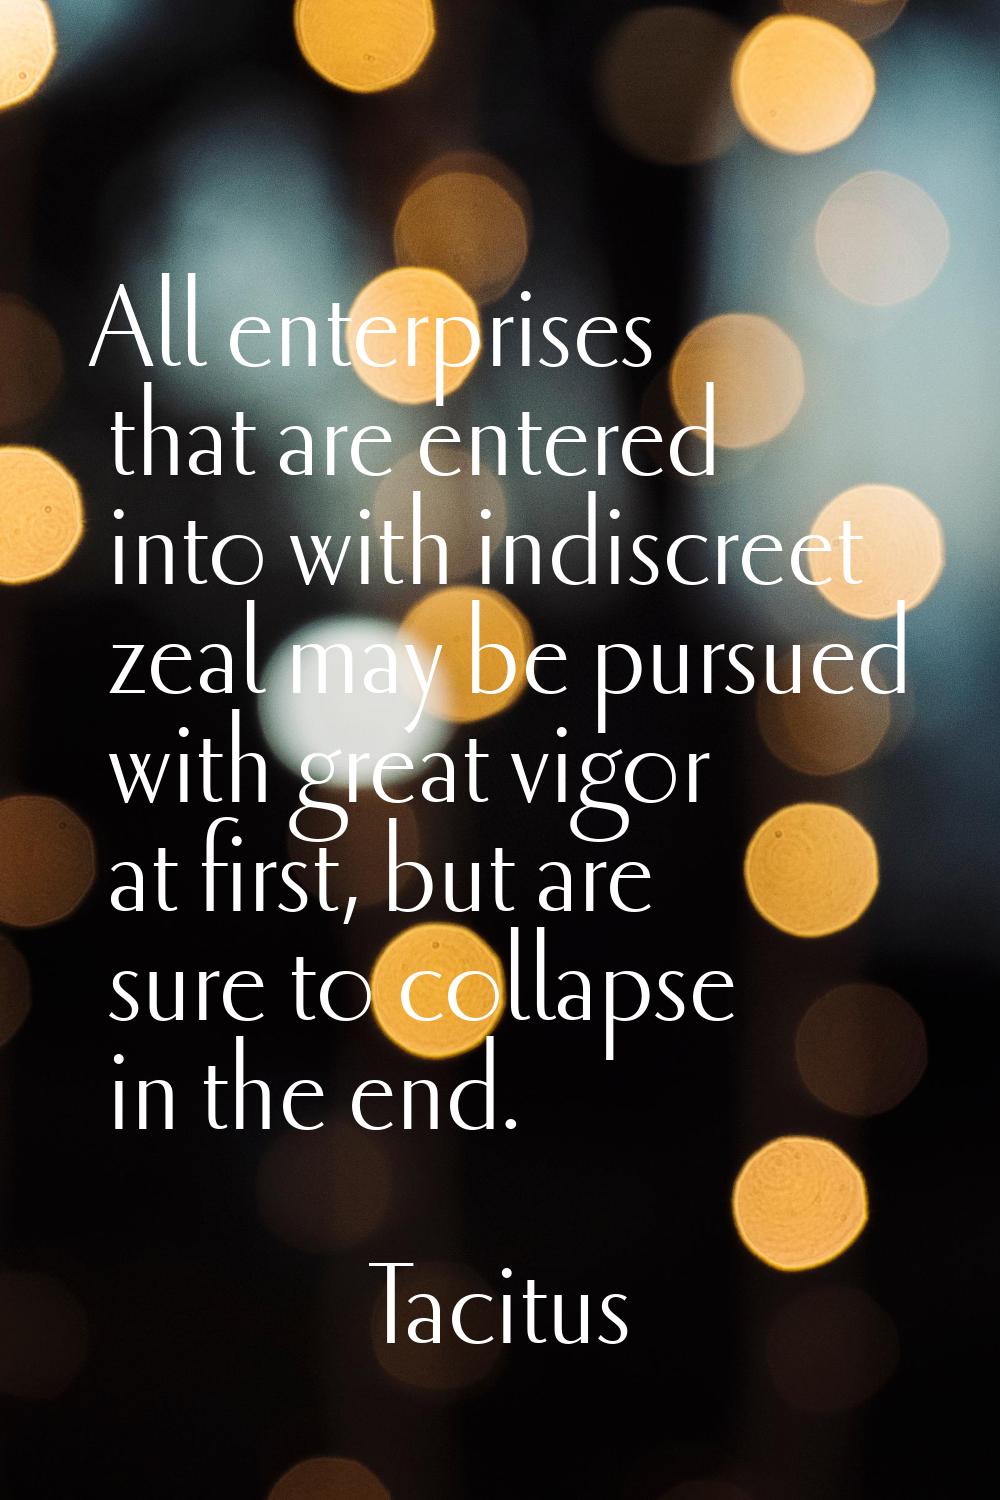 All enterprises that are entered into with indiscreet zeal may be pursued with great vigor at first